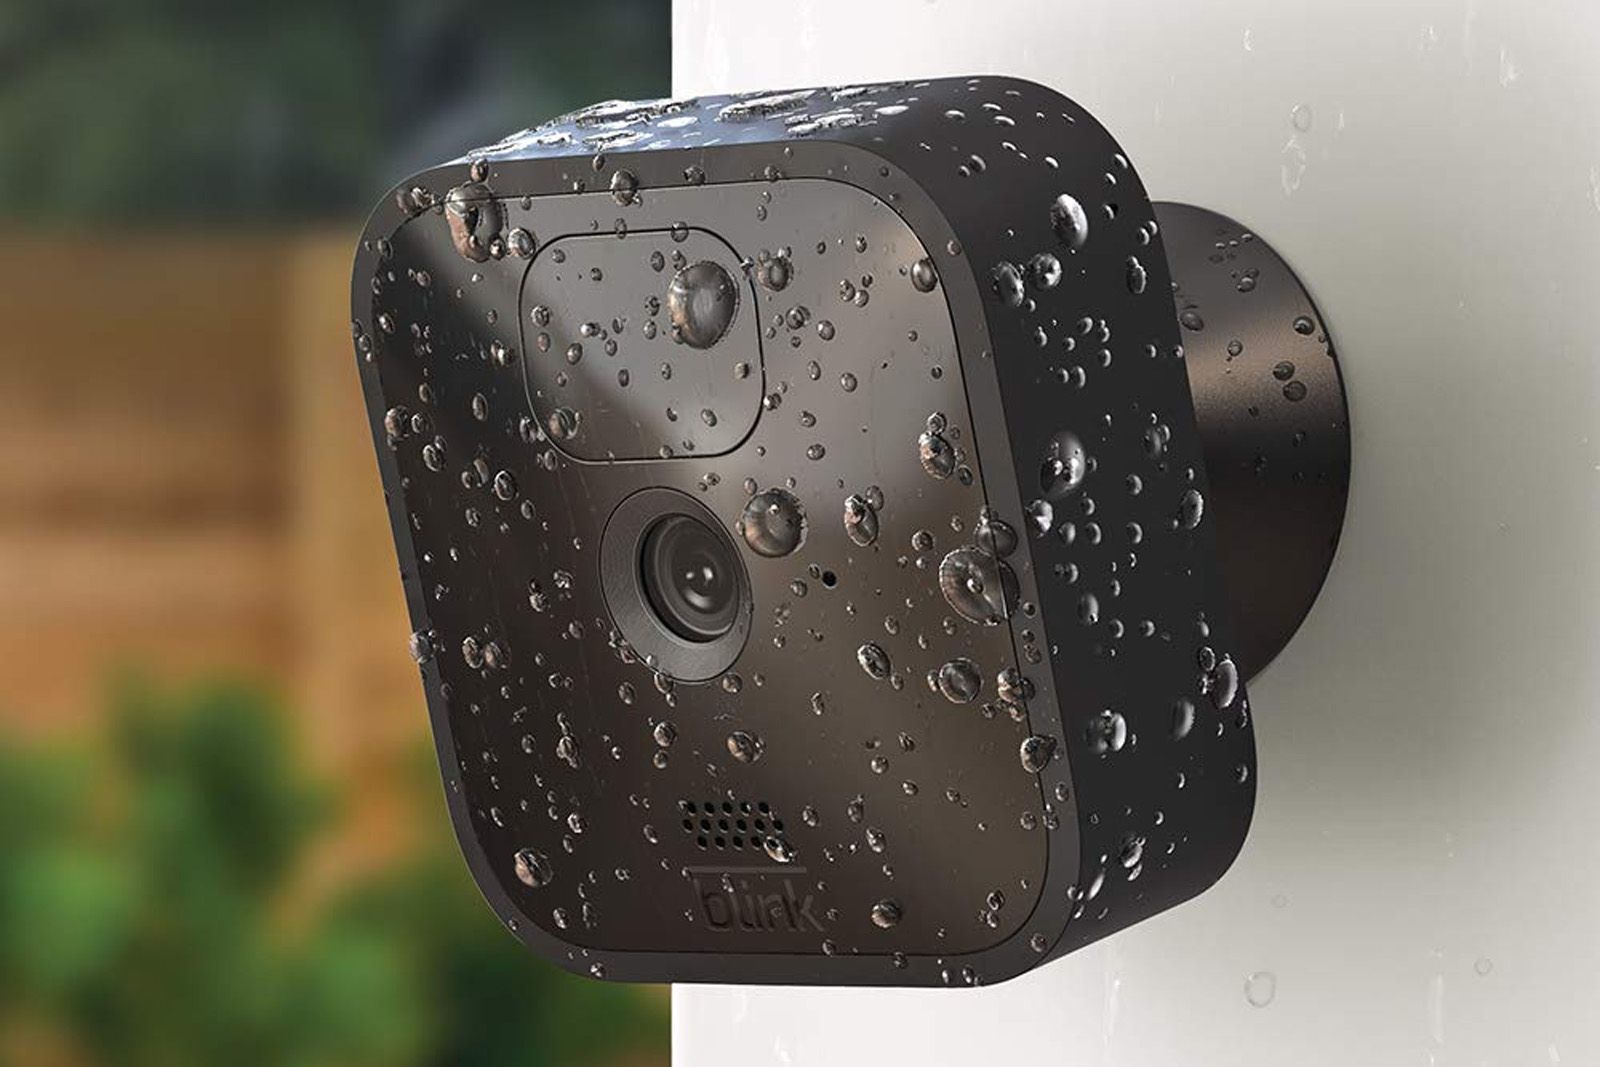 Amazon has reduced the nearly new Blink Outdoor wireless and weatherproof security cam photo 1